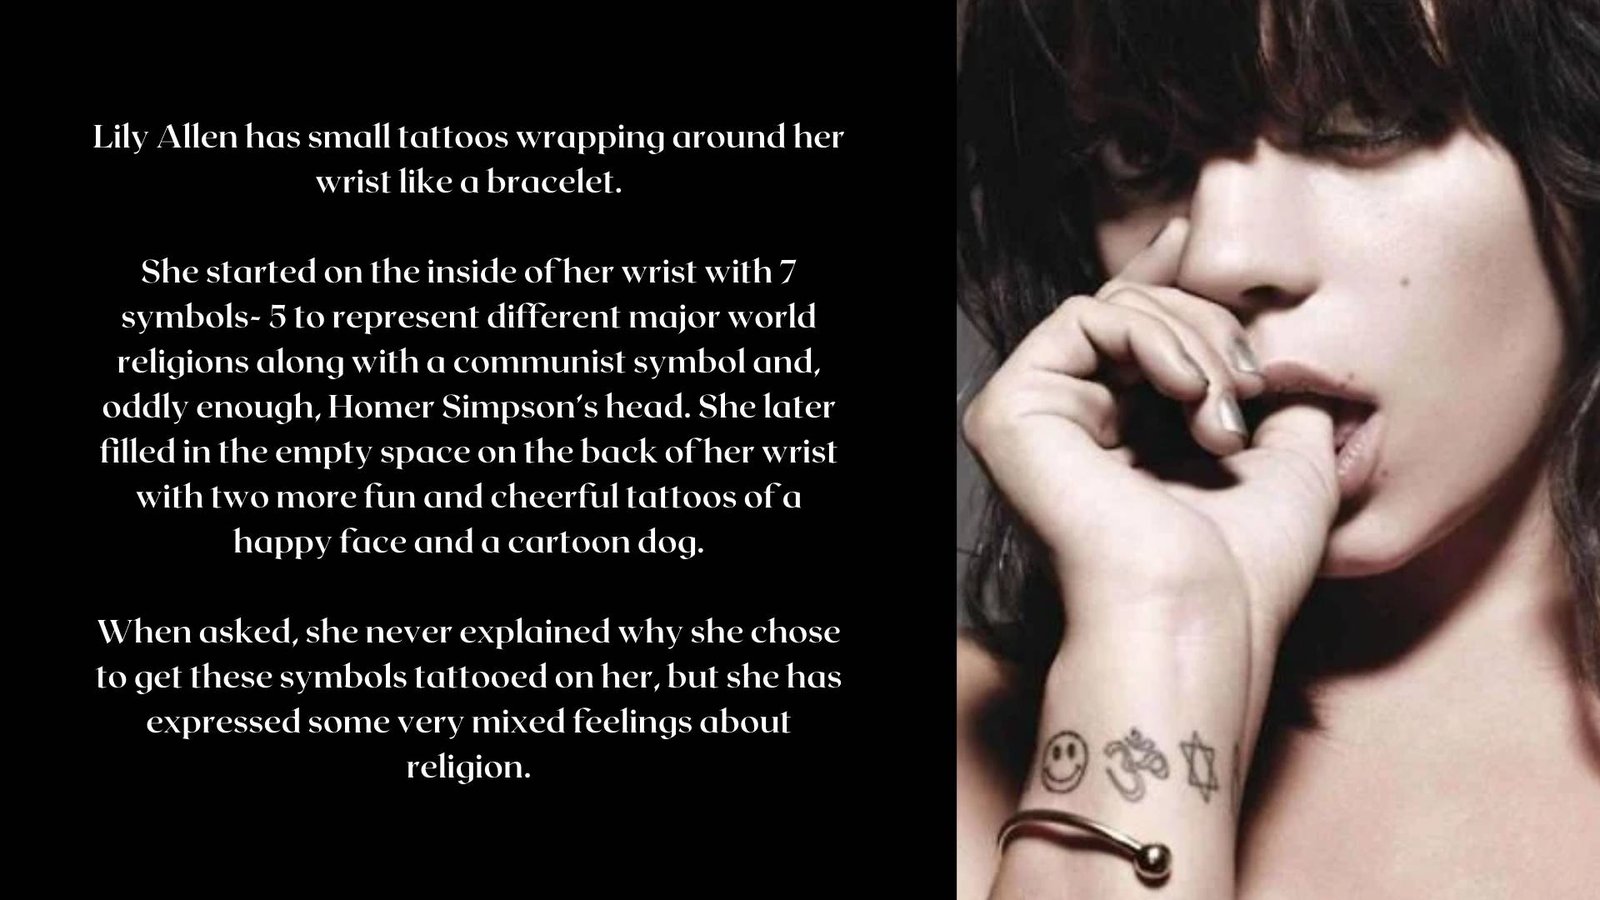 Lily Allen’s Tattoos & Their Meanings